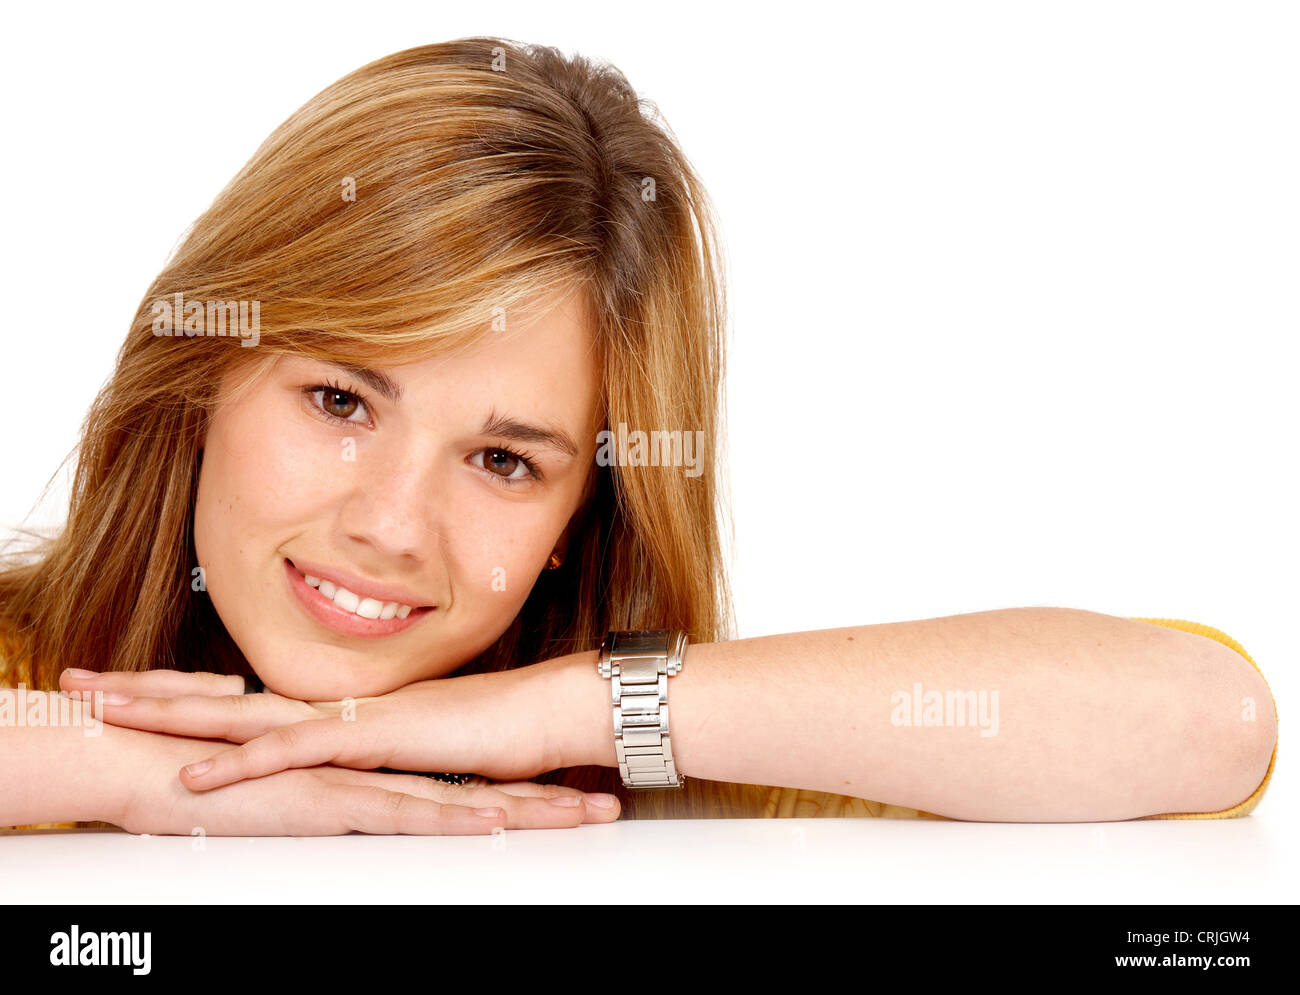 young girl laying her chin on the back of her hands with a smile Stock Photo